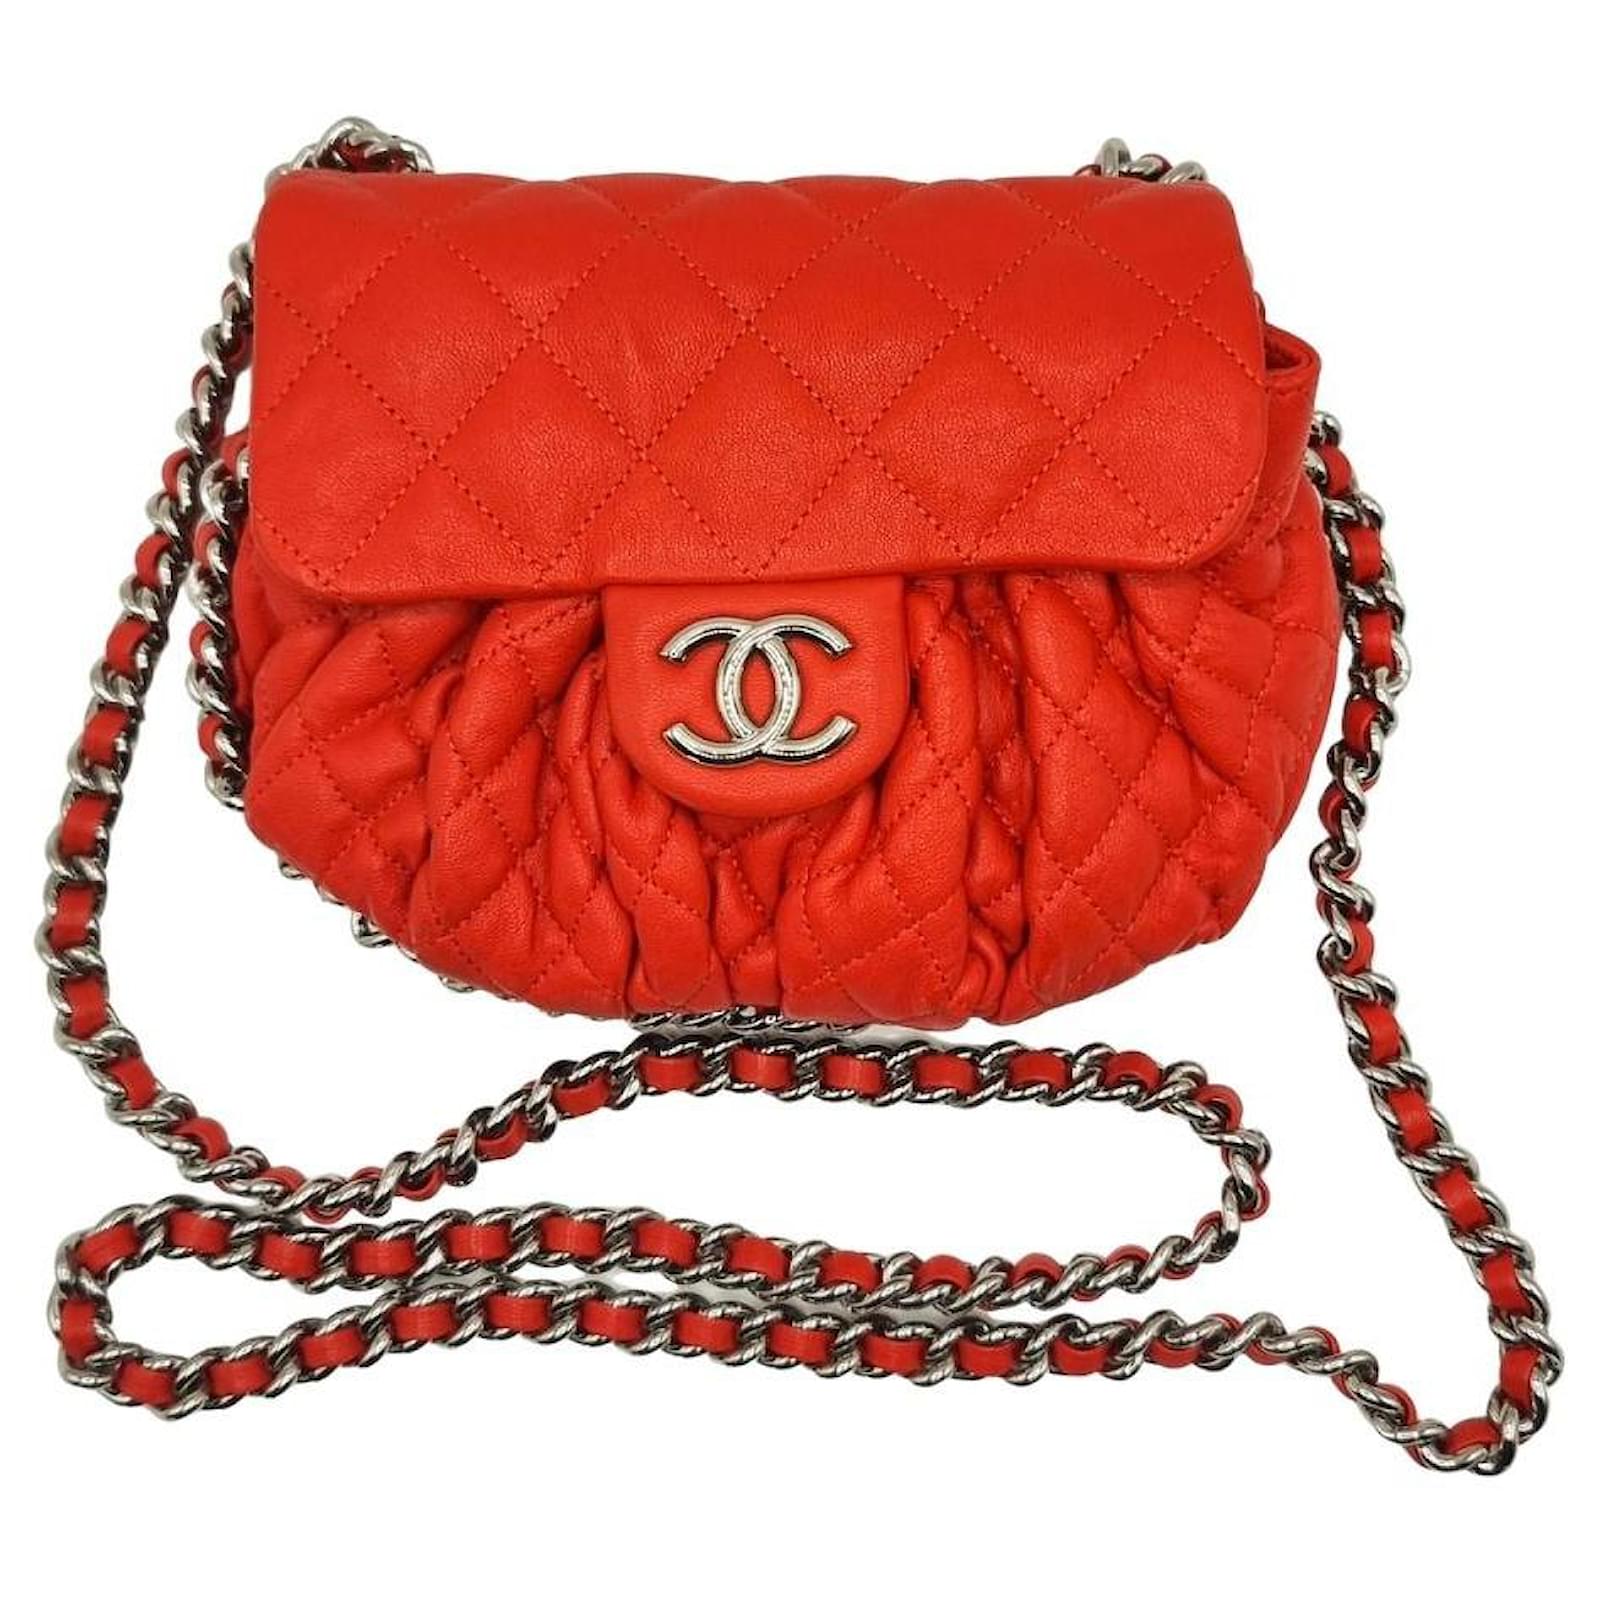 Handbags Chanel Chain Around Limited Edition Small Red Leather Flap